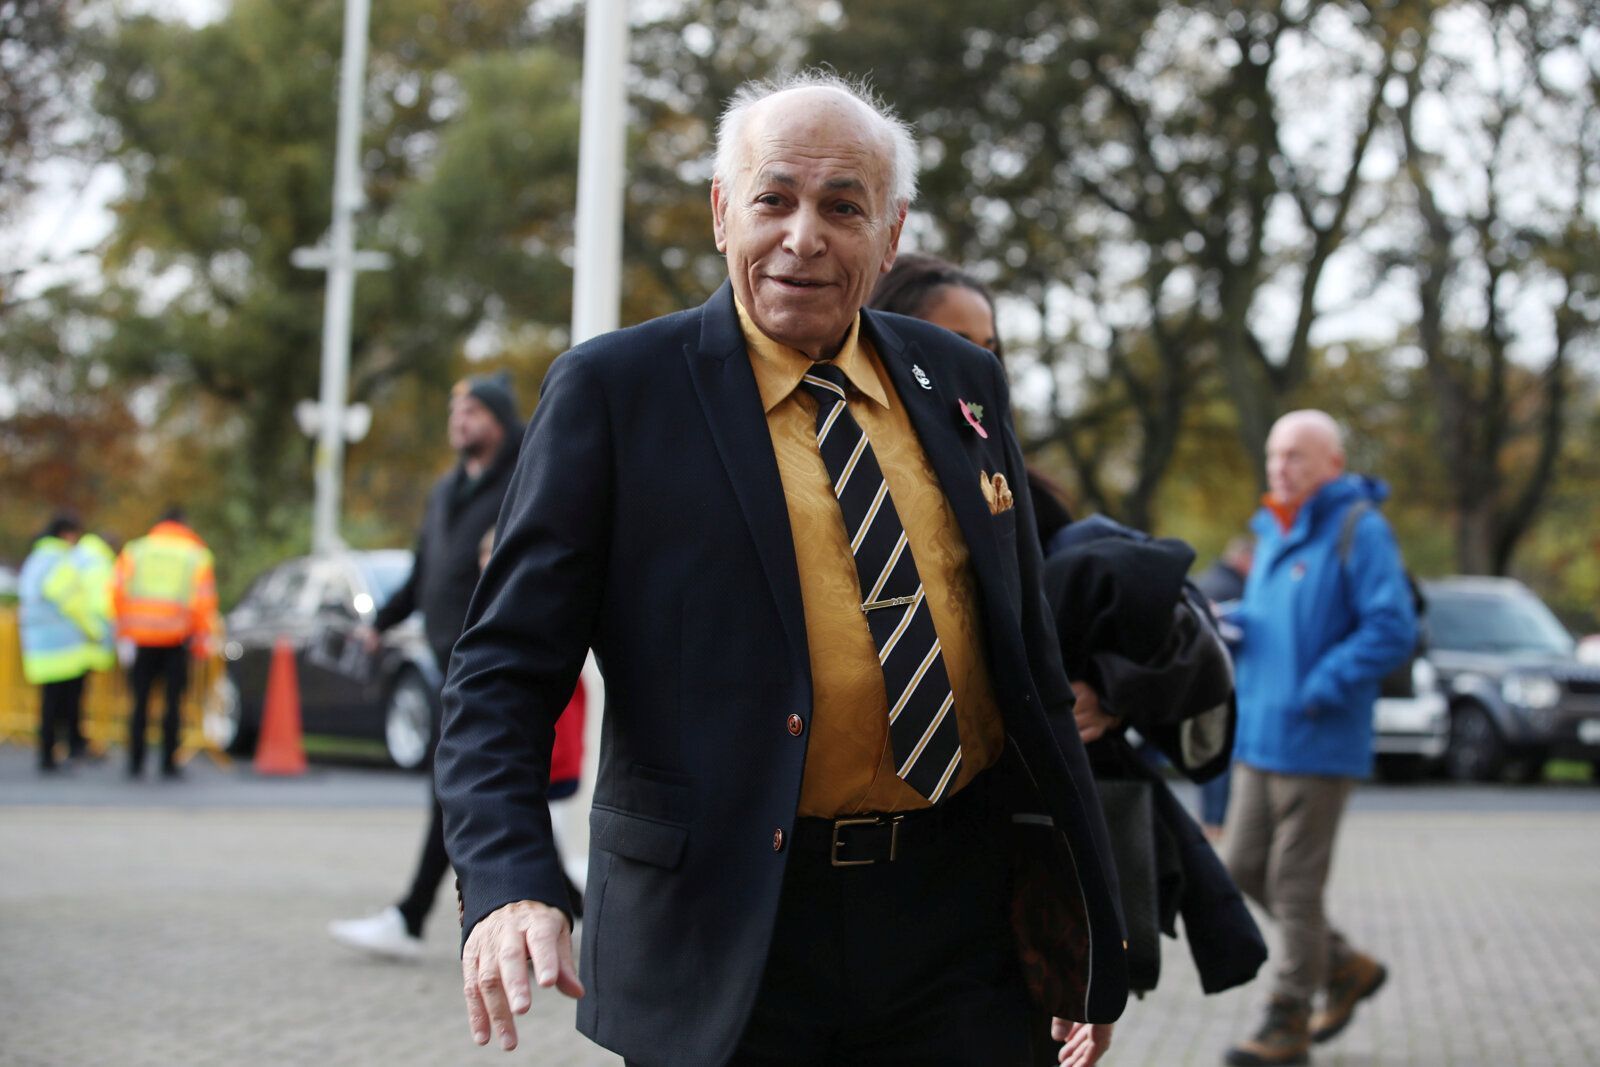 Soccer Football - Championship - Hull City v West Bromwich Albion - KCOM Stadium, Hull, Britain - November 9, 2019   Assem Allam owner of Hull City walks into the stadium   Action Images/John Clifton    EDITORIAL USE ONLY. No use with unauthorized audio, video, data, fixture lists, club/league logos or 